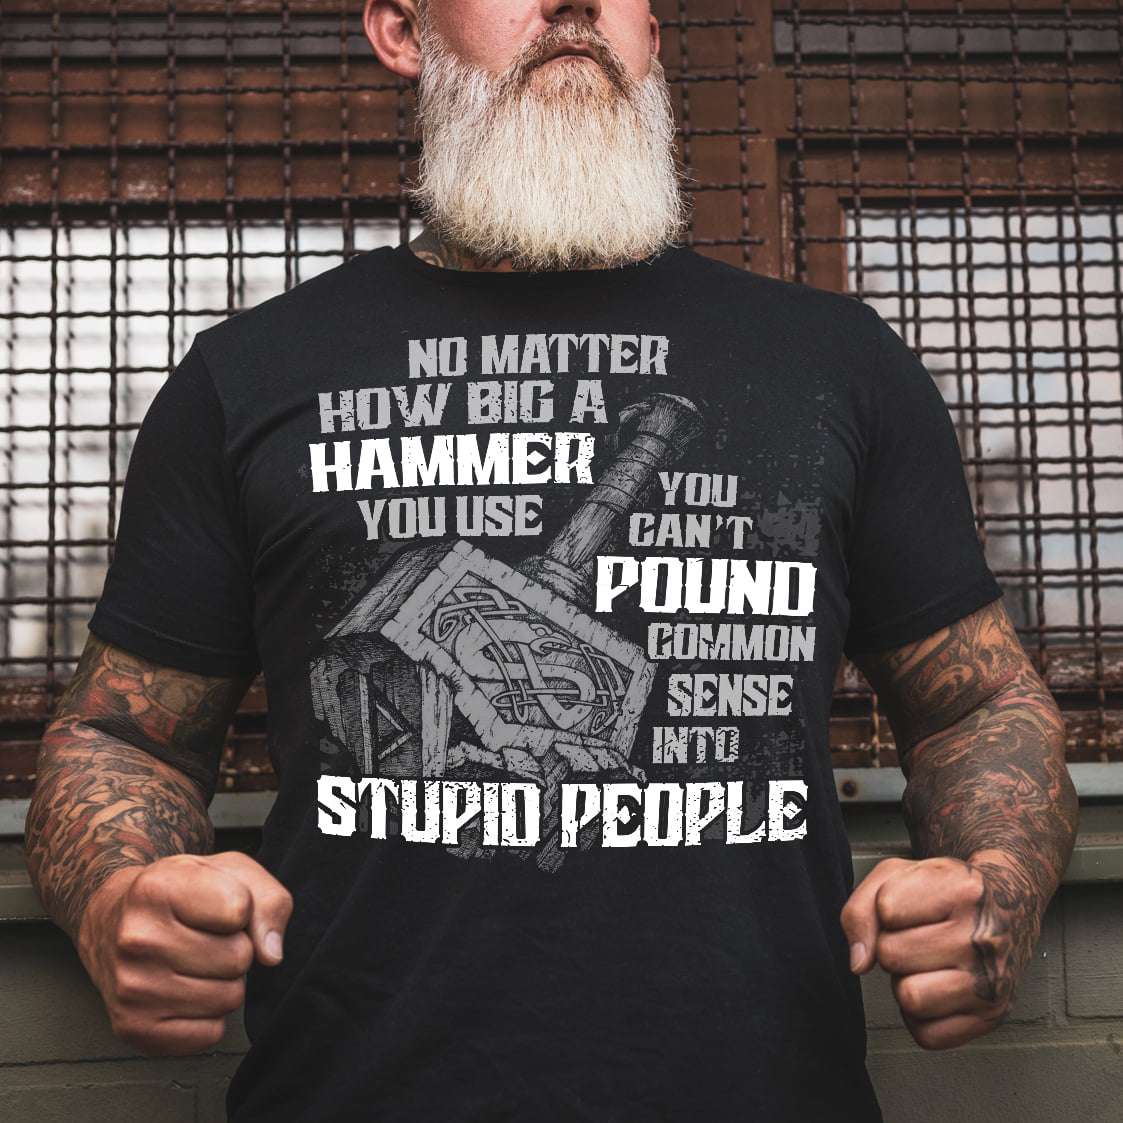 No matter how big a hammer you use you can't pound commom sense into stupid people - Viking hammer